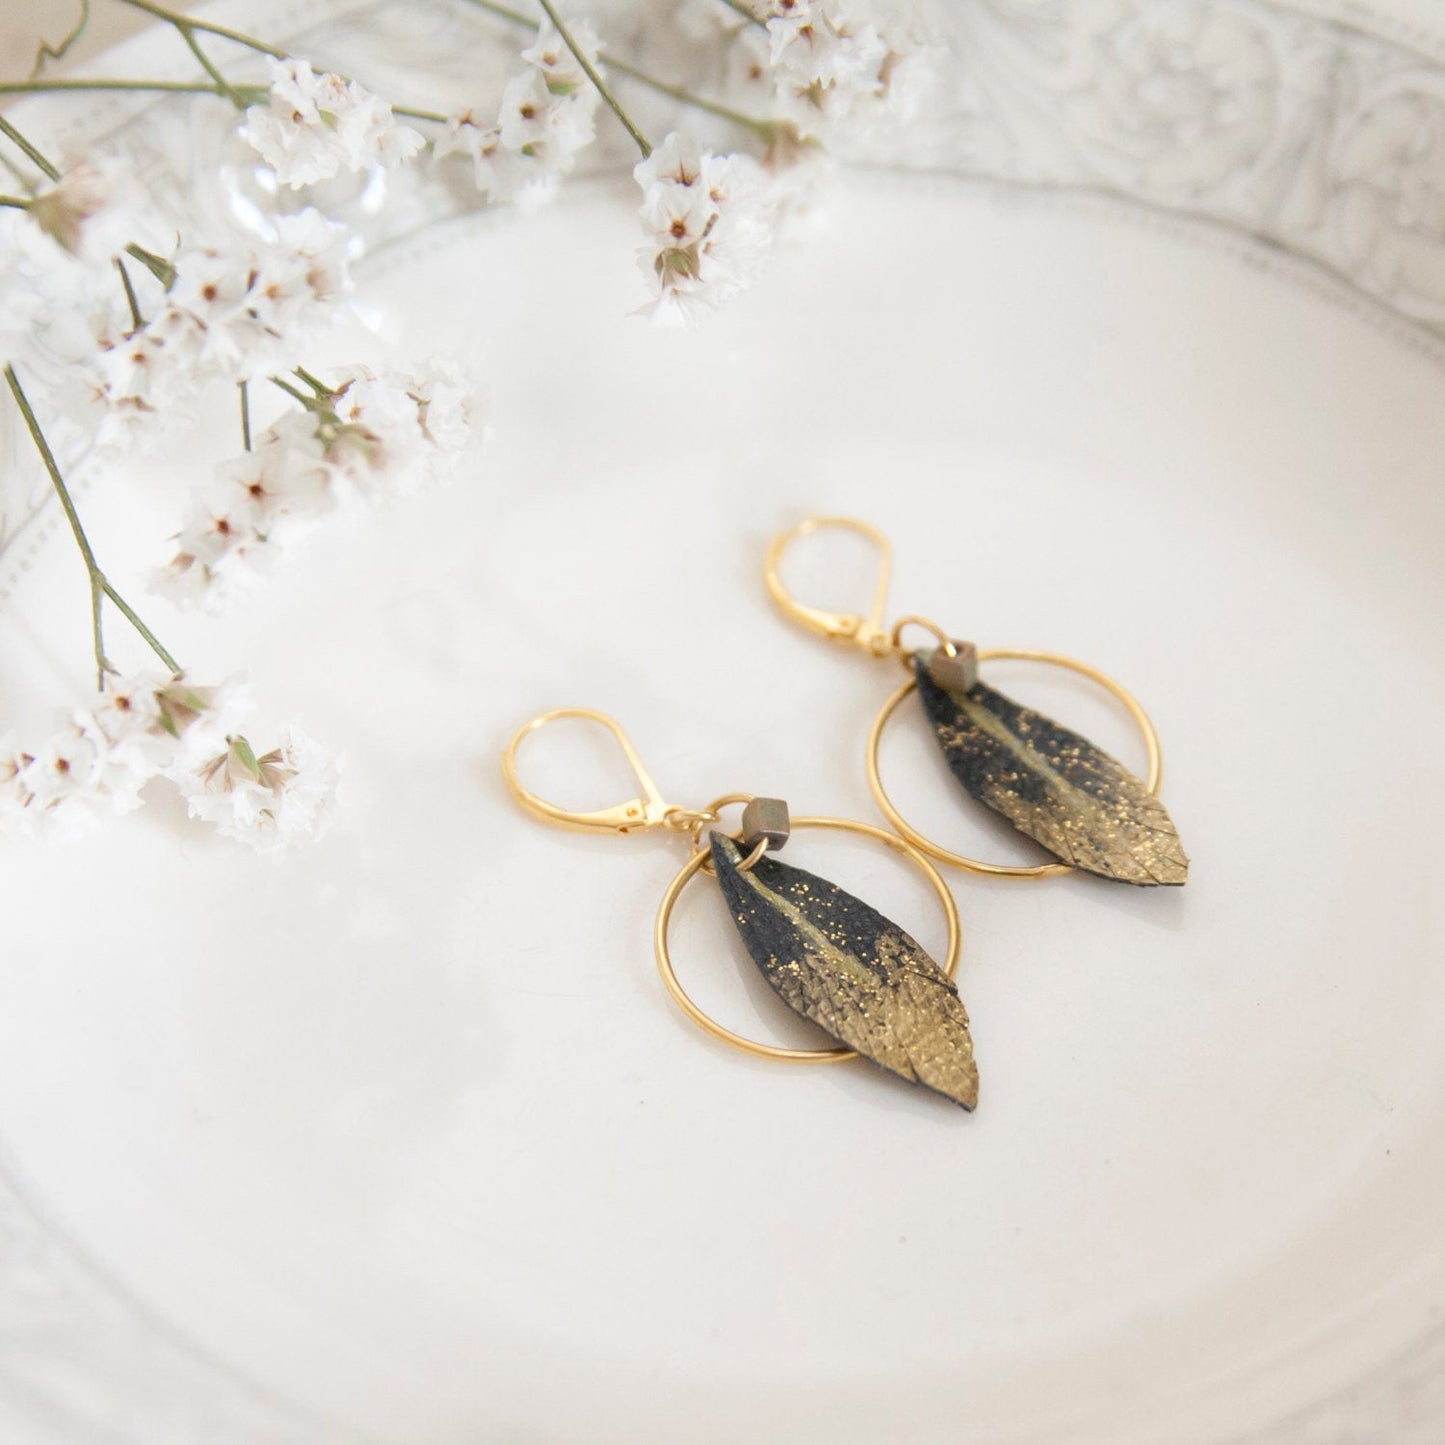 Feather hoop earrings in black and gold leather